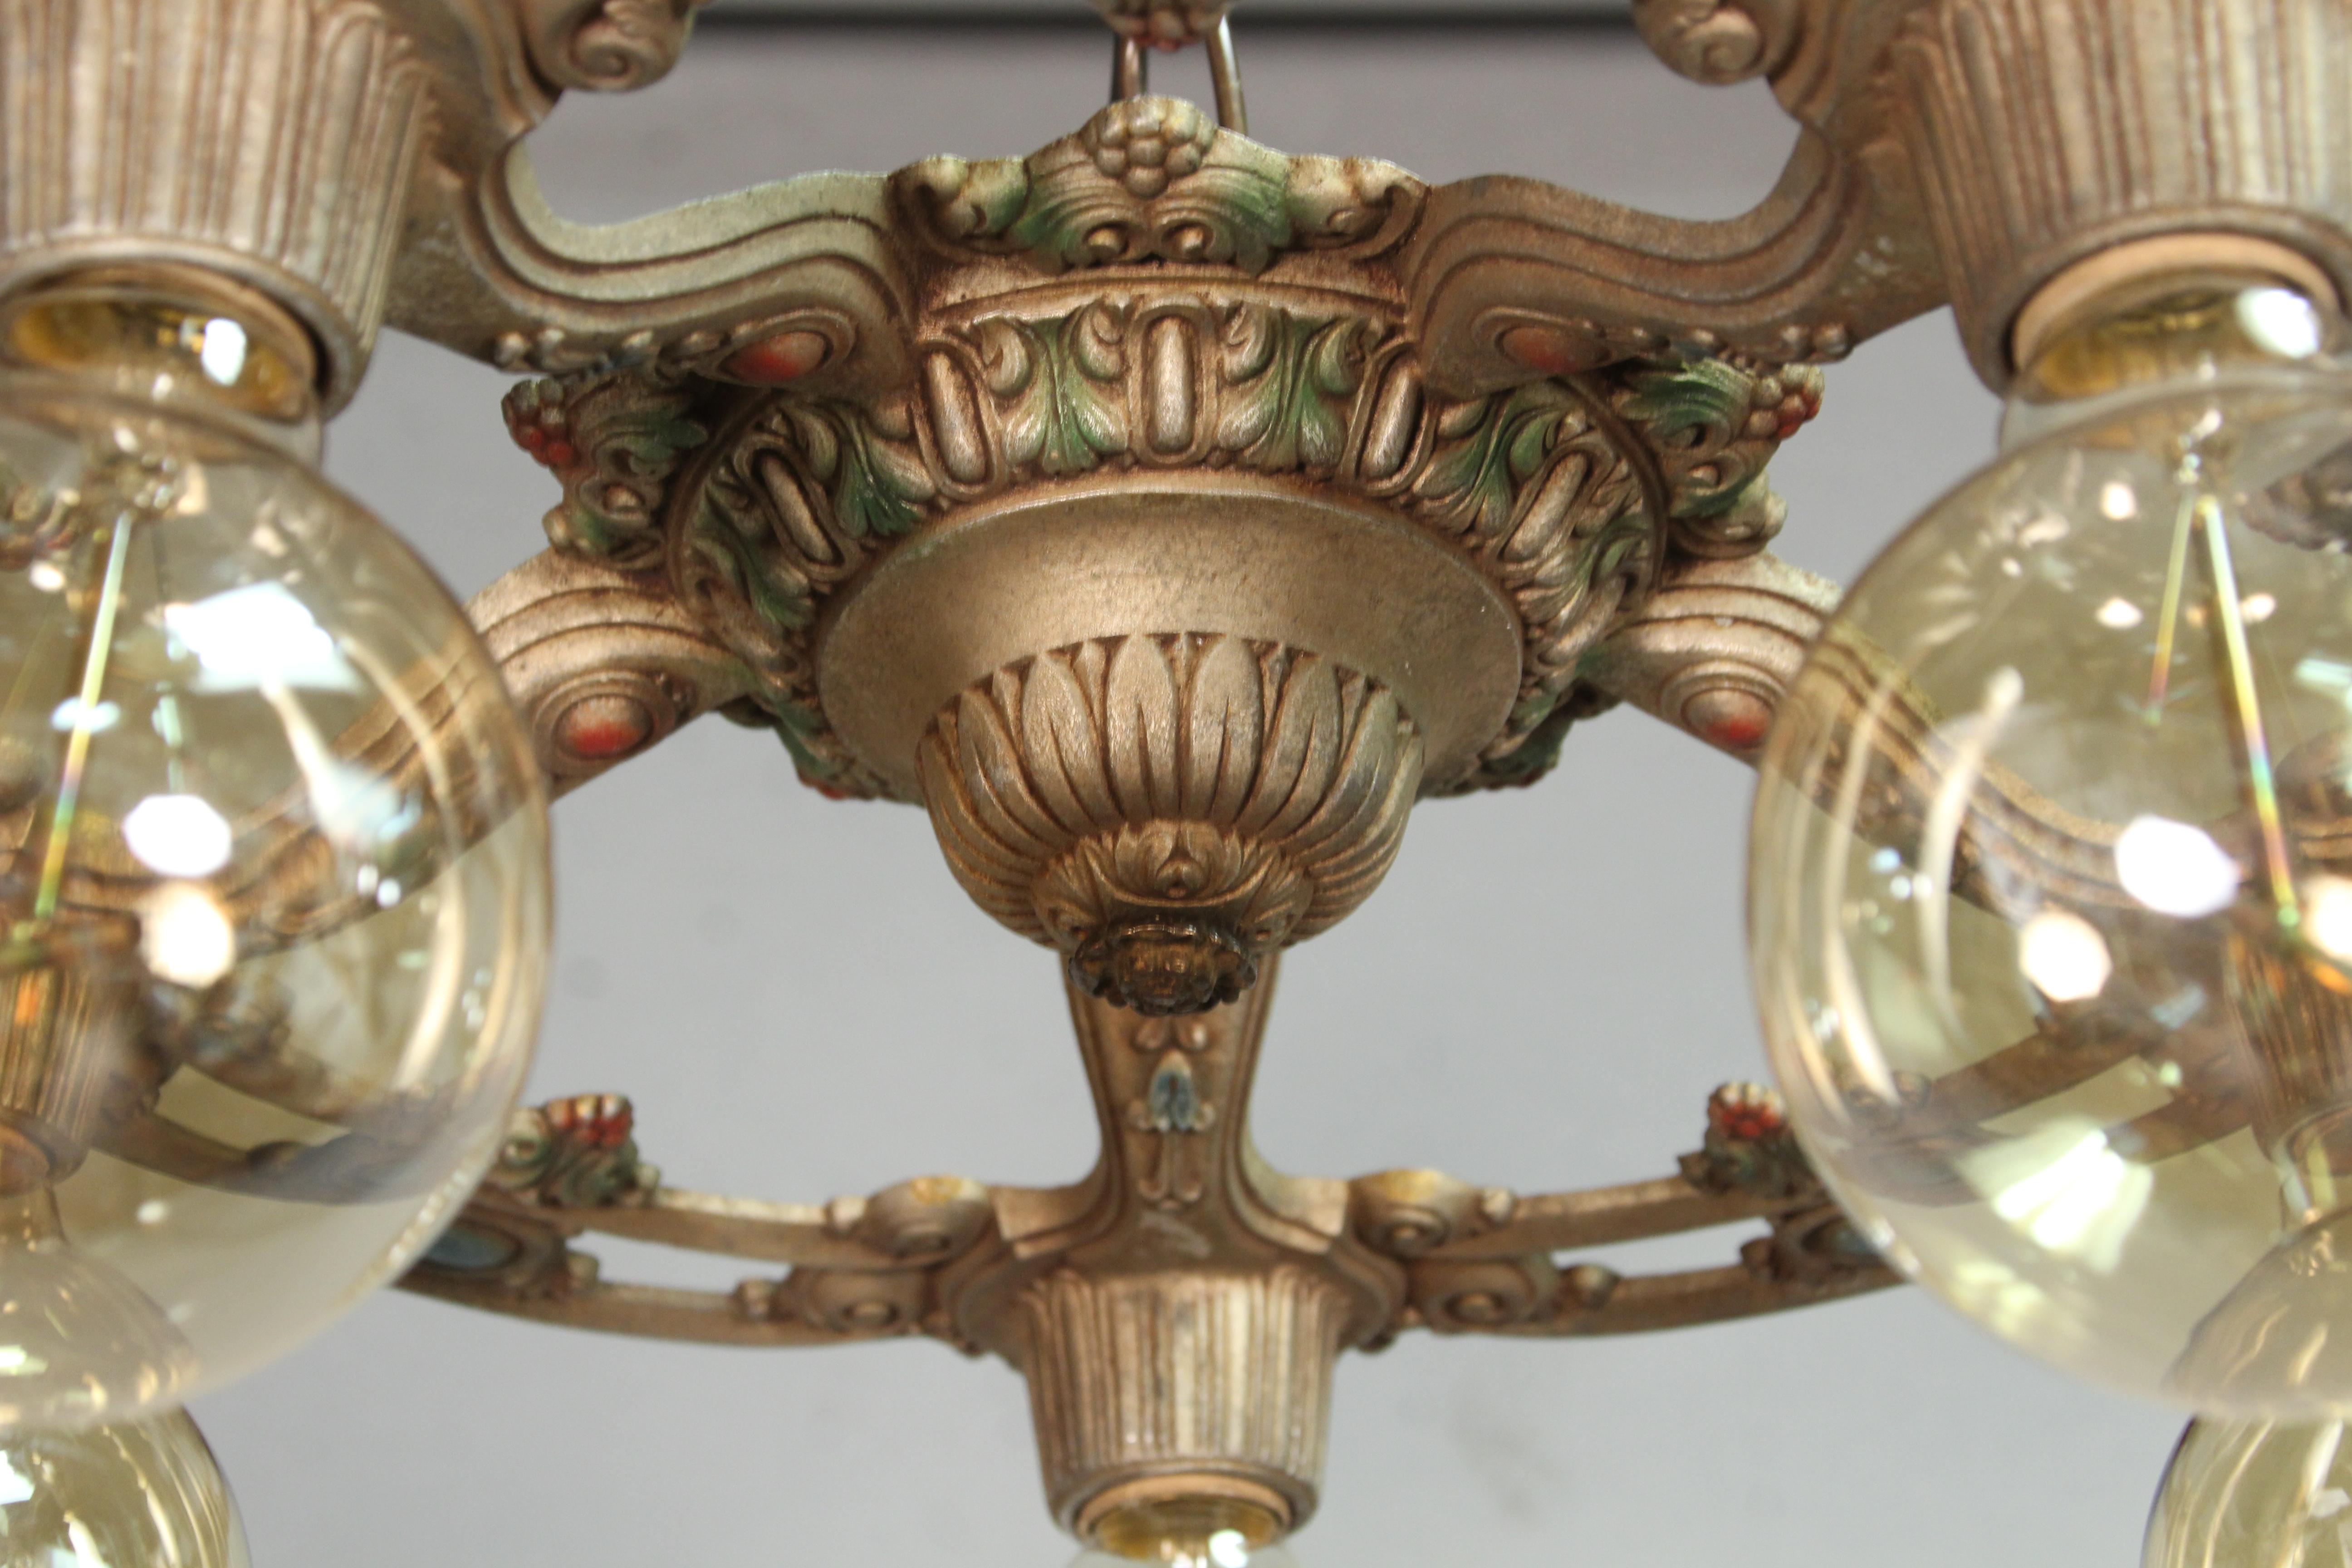 North American Exquisite Ceiling Mount Chandelier with Five Lights, circa 1920s